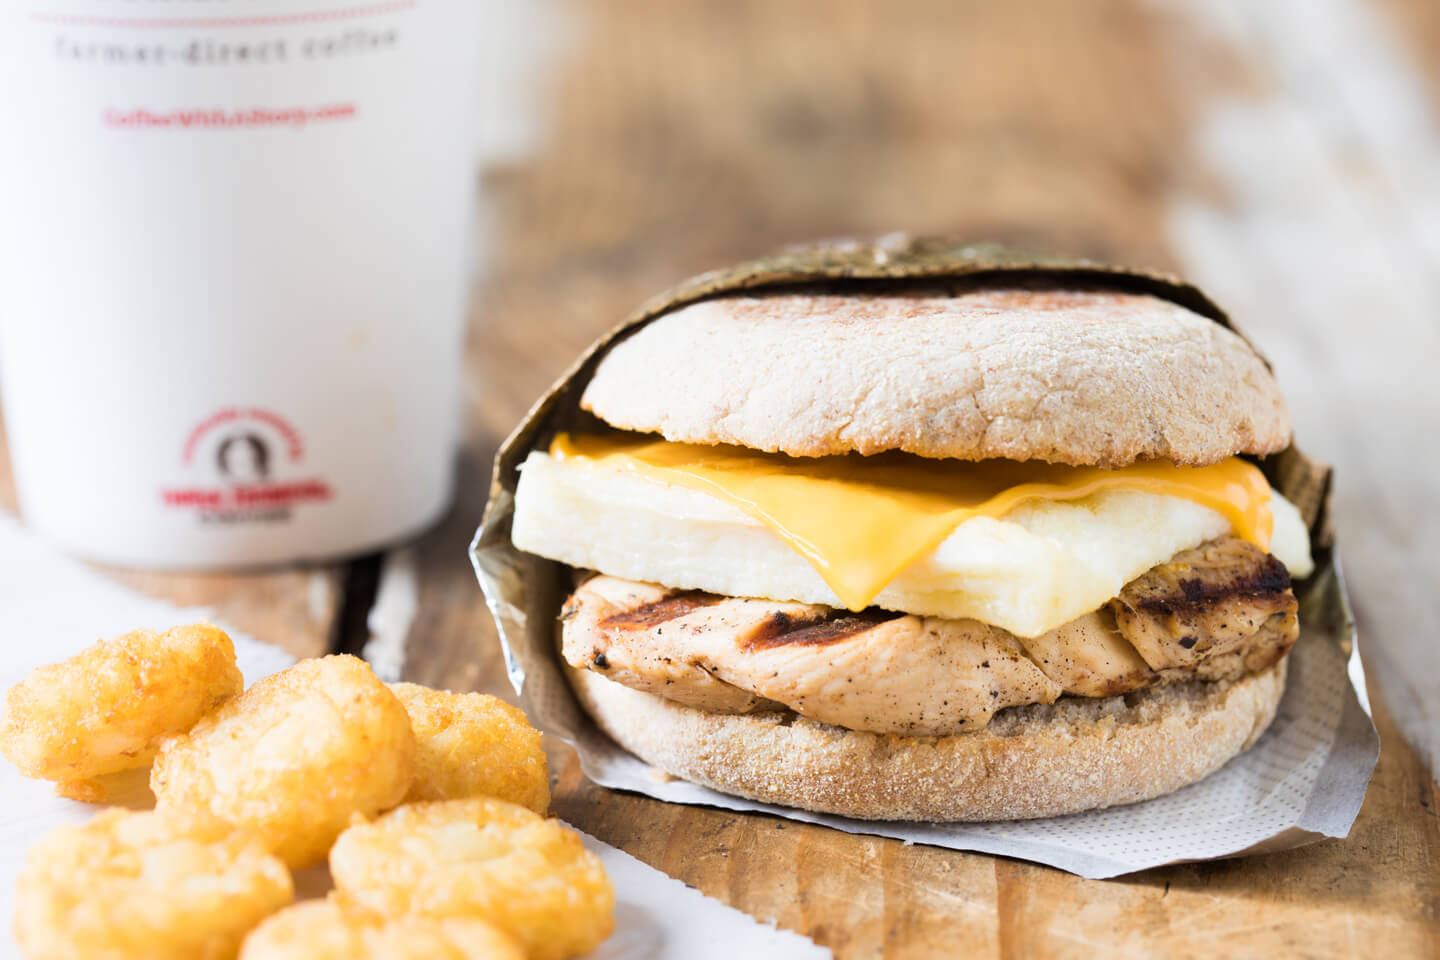 Best Fast Food Breakfast Choices | Egg White Grill Sandwich | FastFoodMenuPrices.com